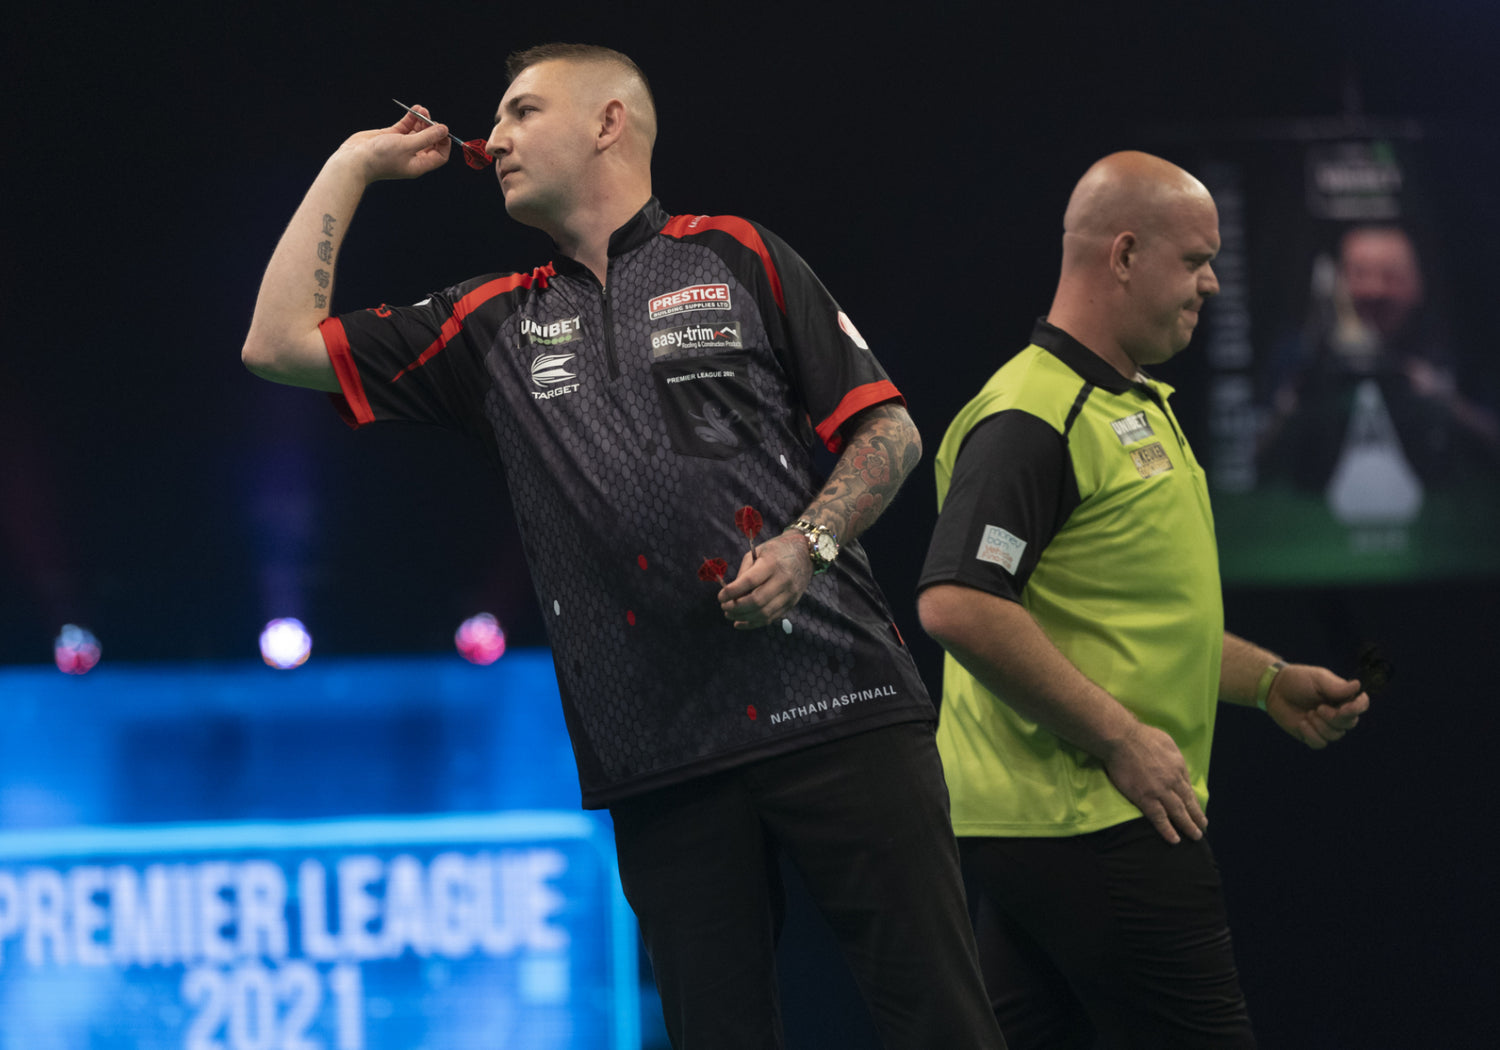 Aspinall hoping to continue 'childhood dream' against MvG